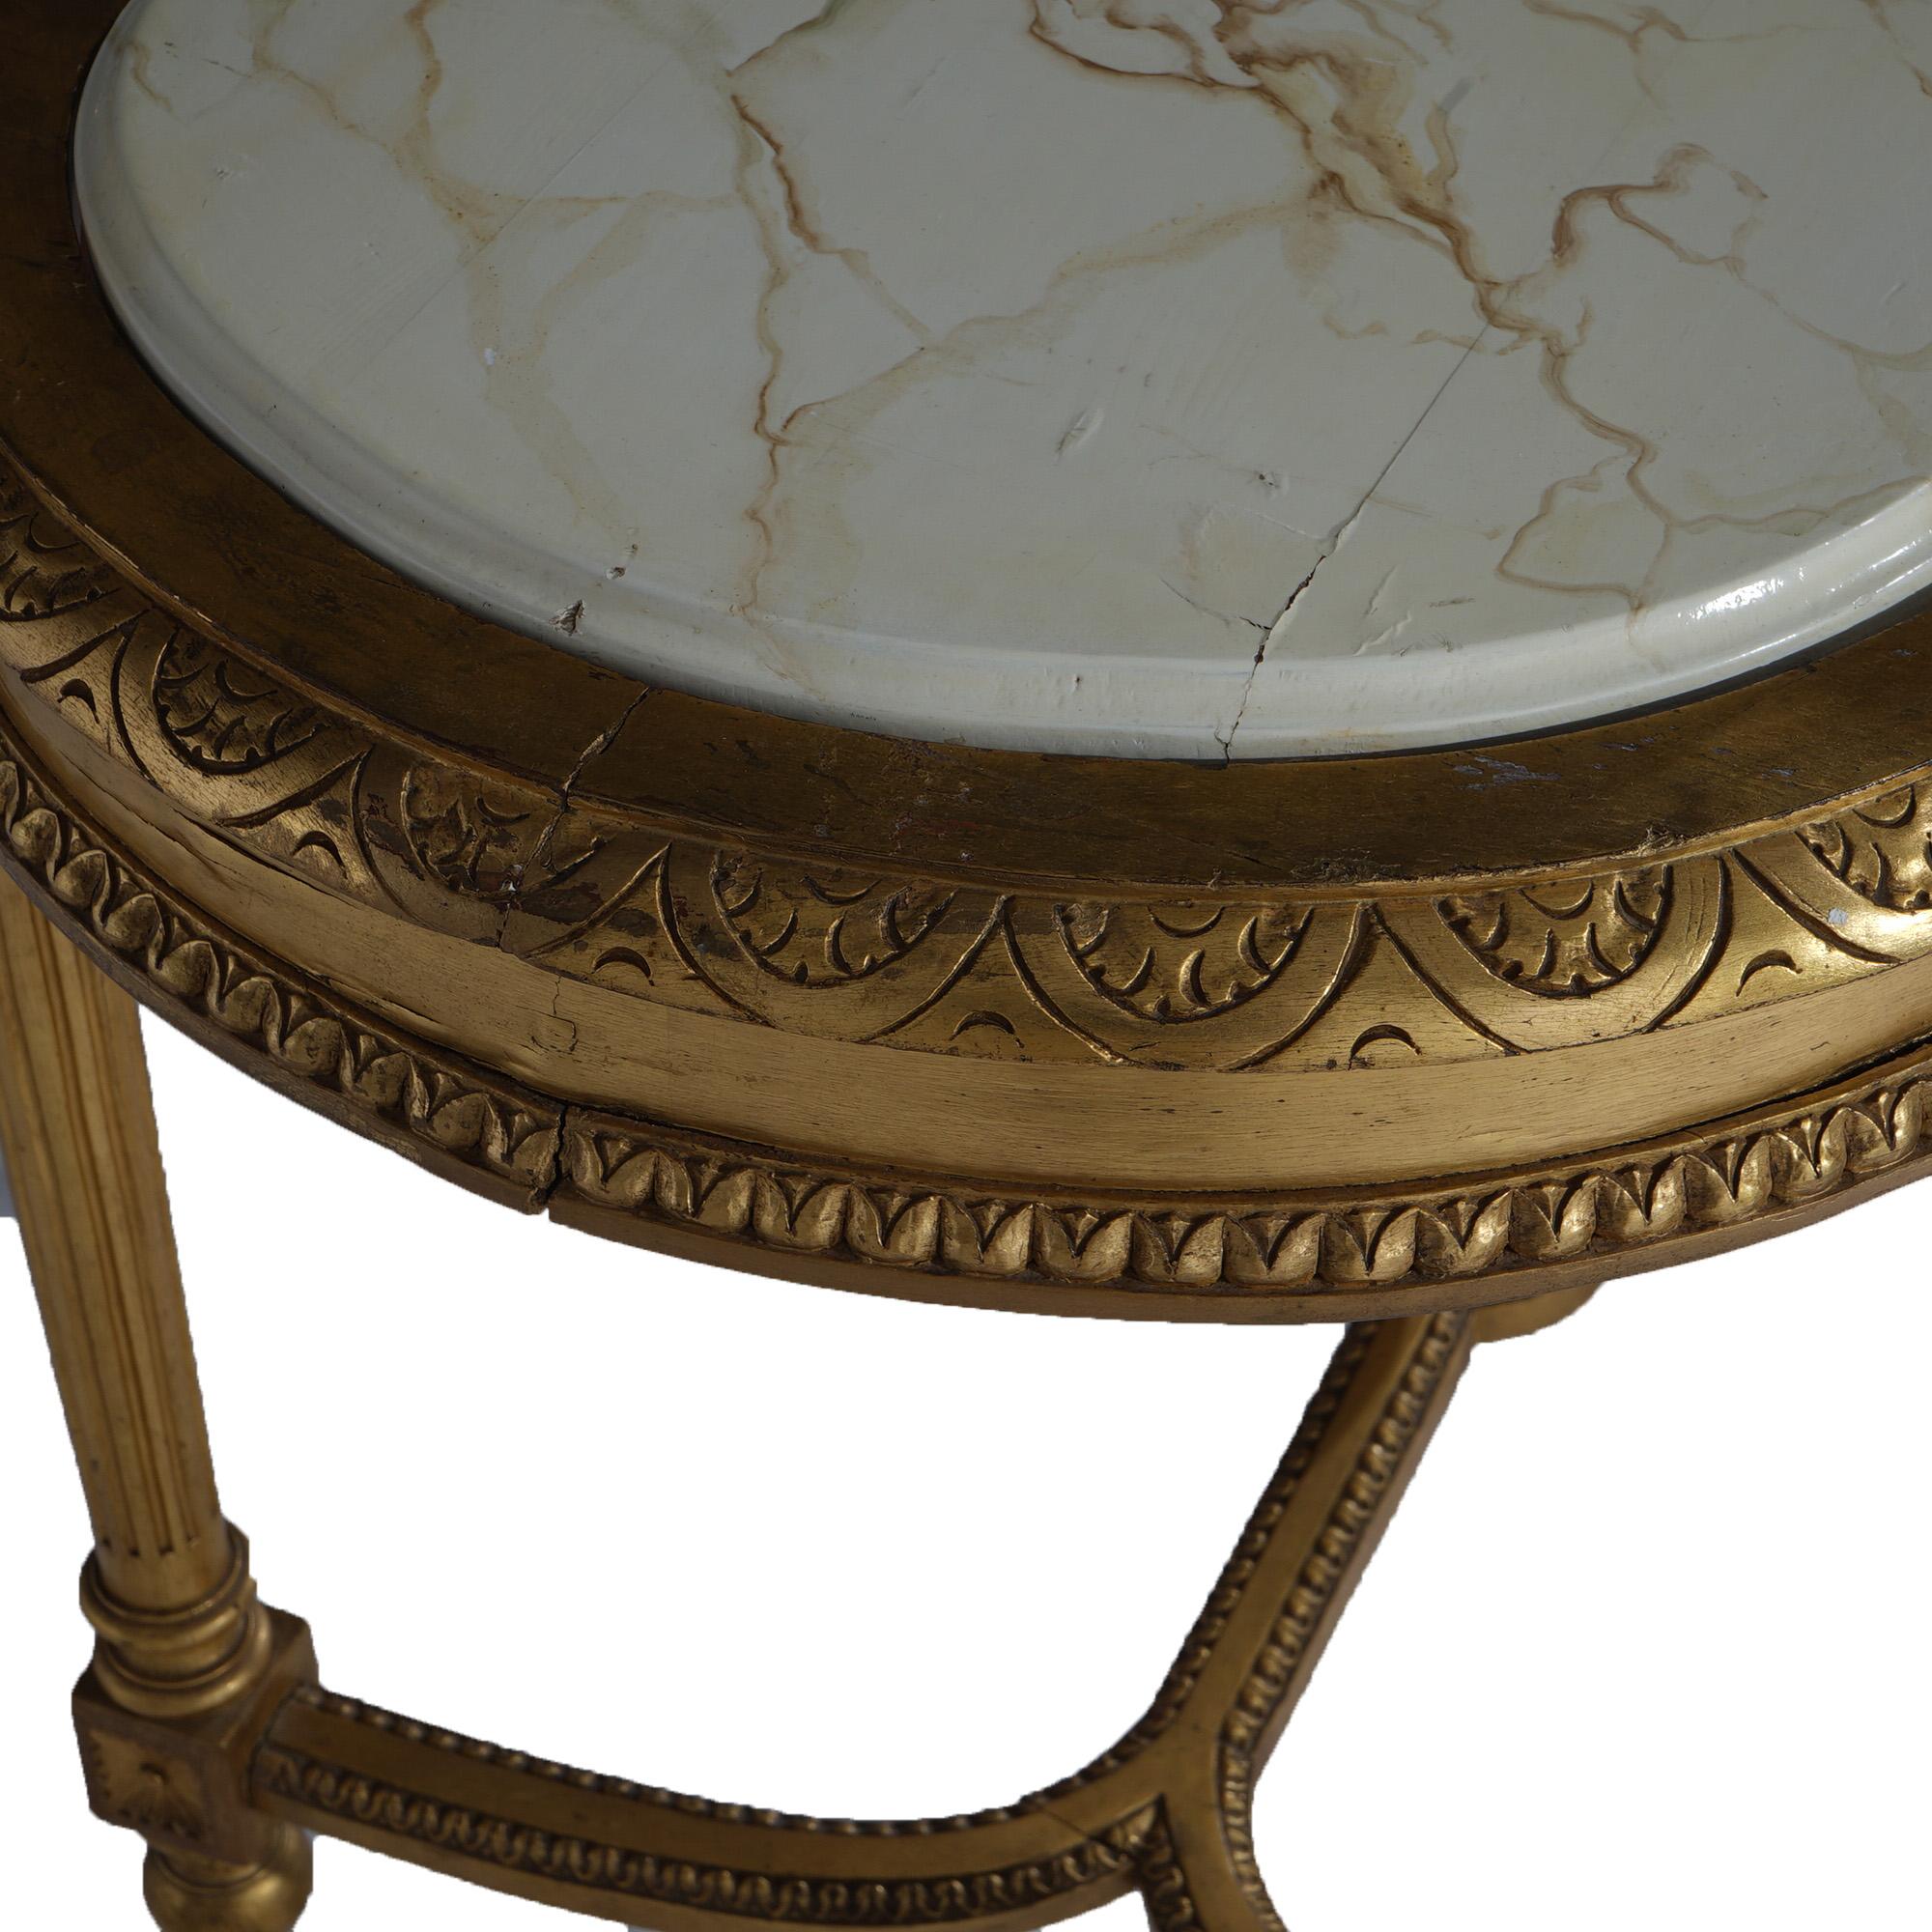 Antique French Louis XVI Style Giltwood Parlor Table with Faux Painted Top 19thC For Sale 12